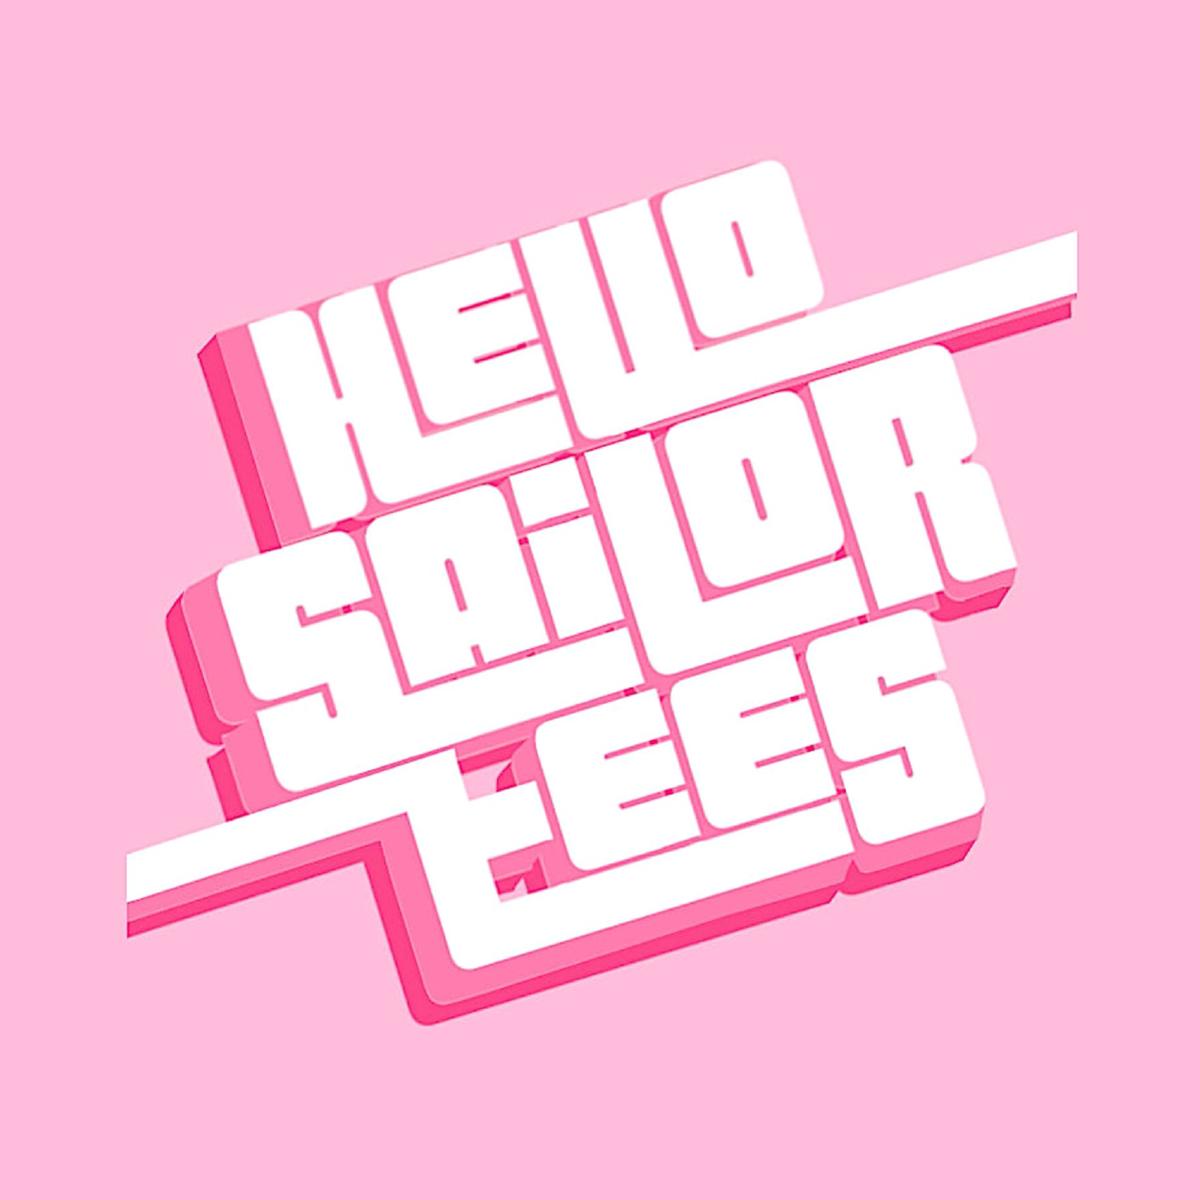 HelloSailorTees's images